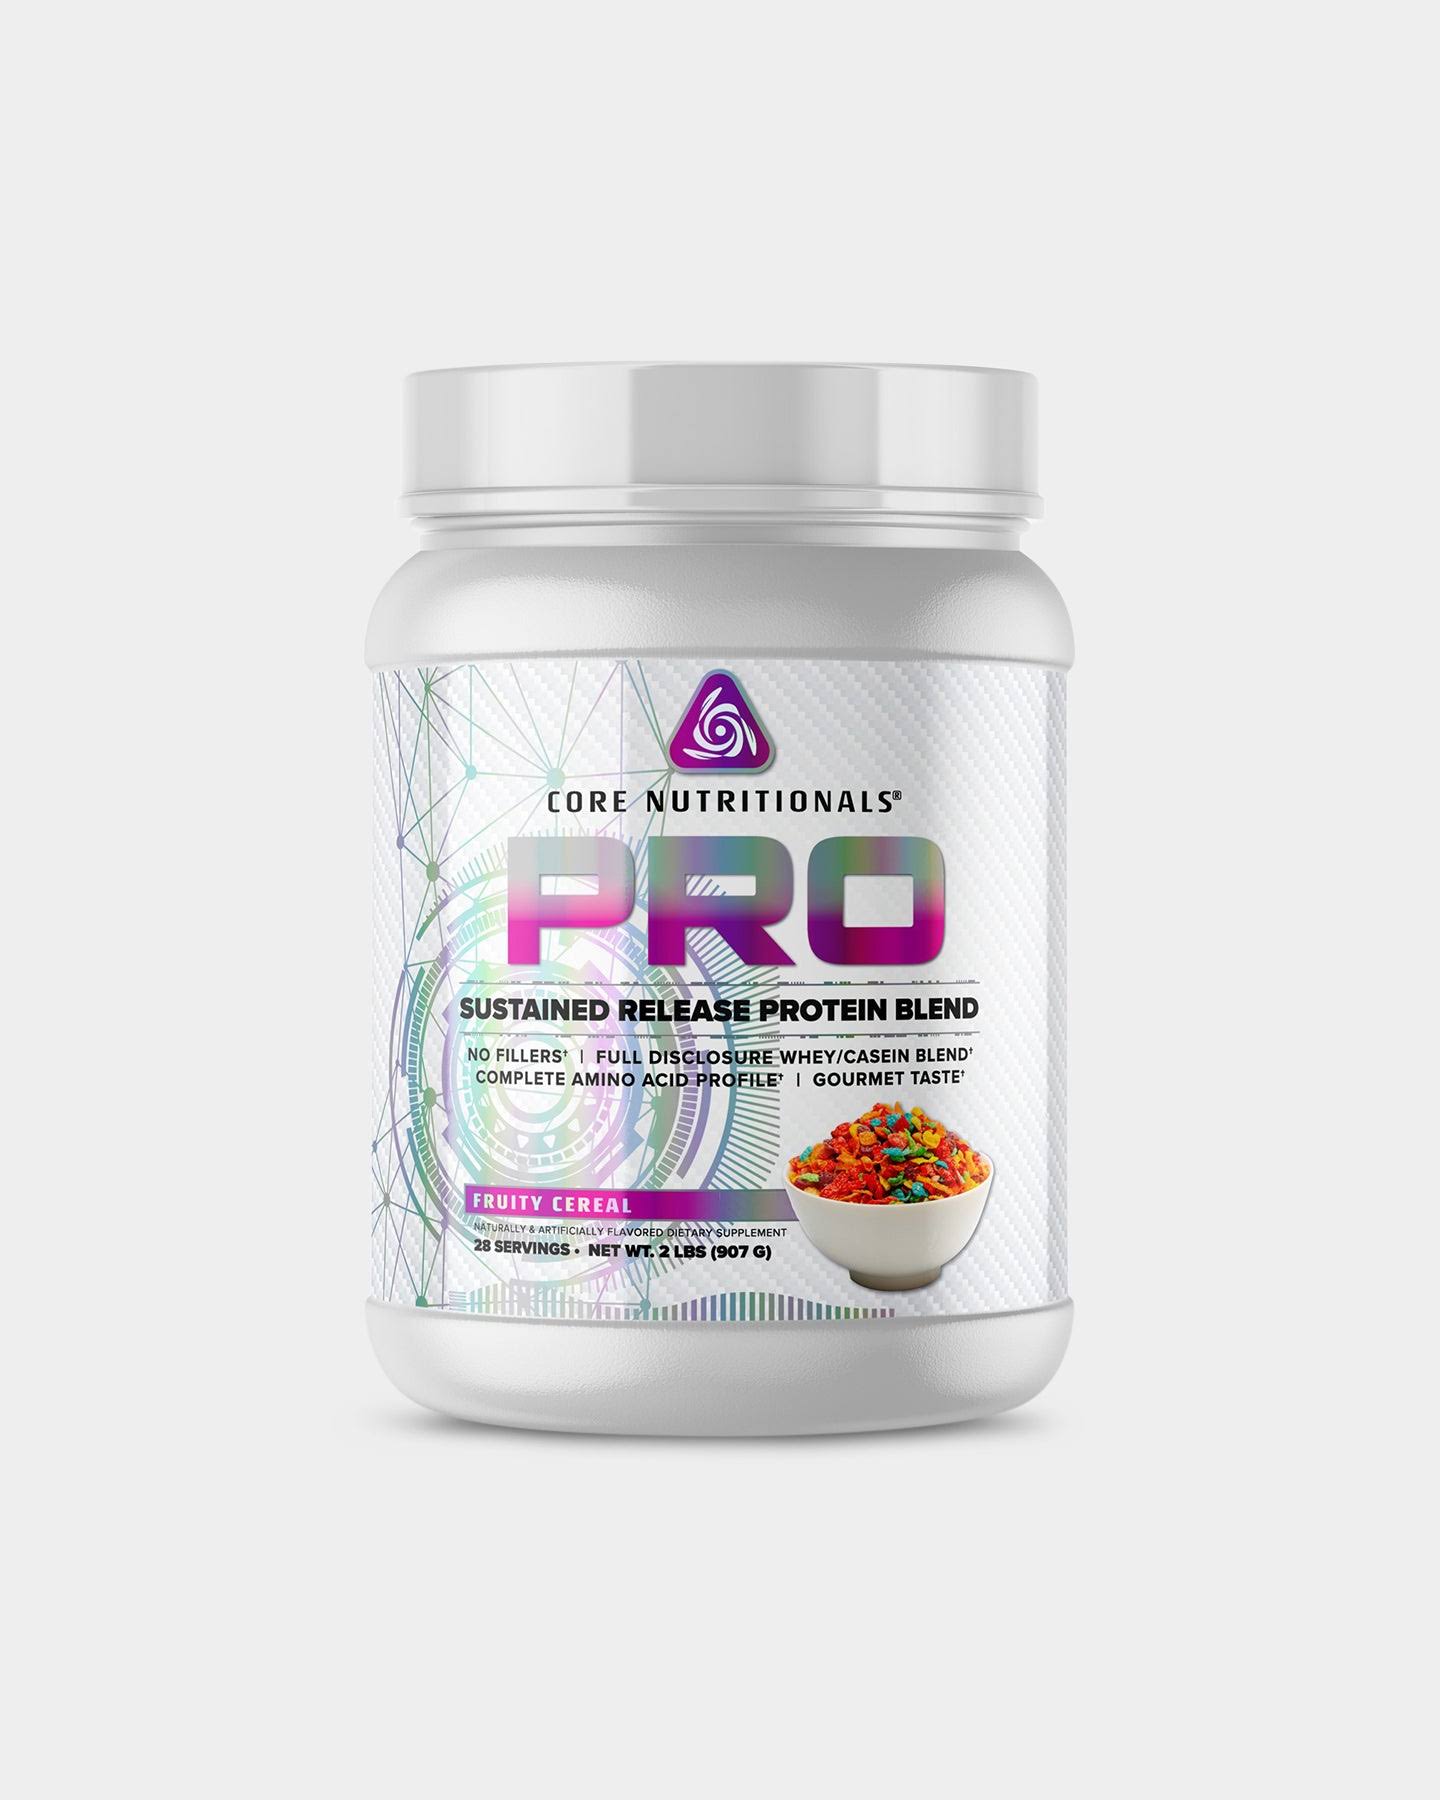 Core Nutritionals Core Pro 25 - 907 G - Fruity Cereal